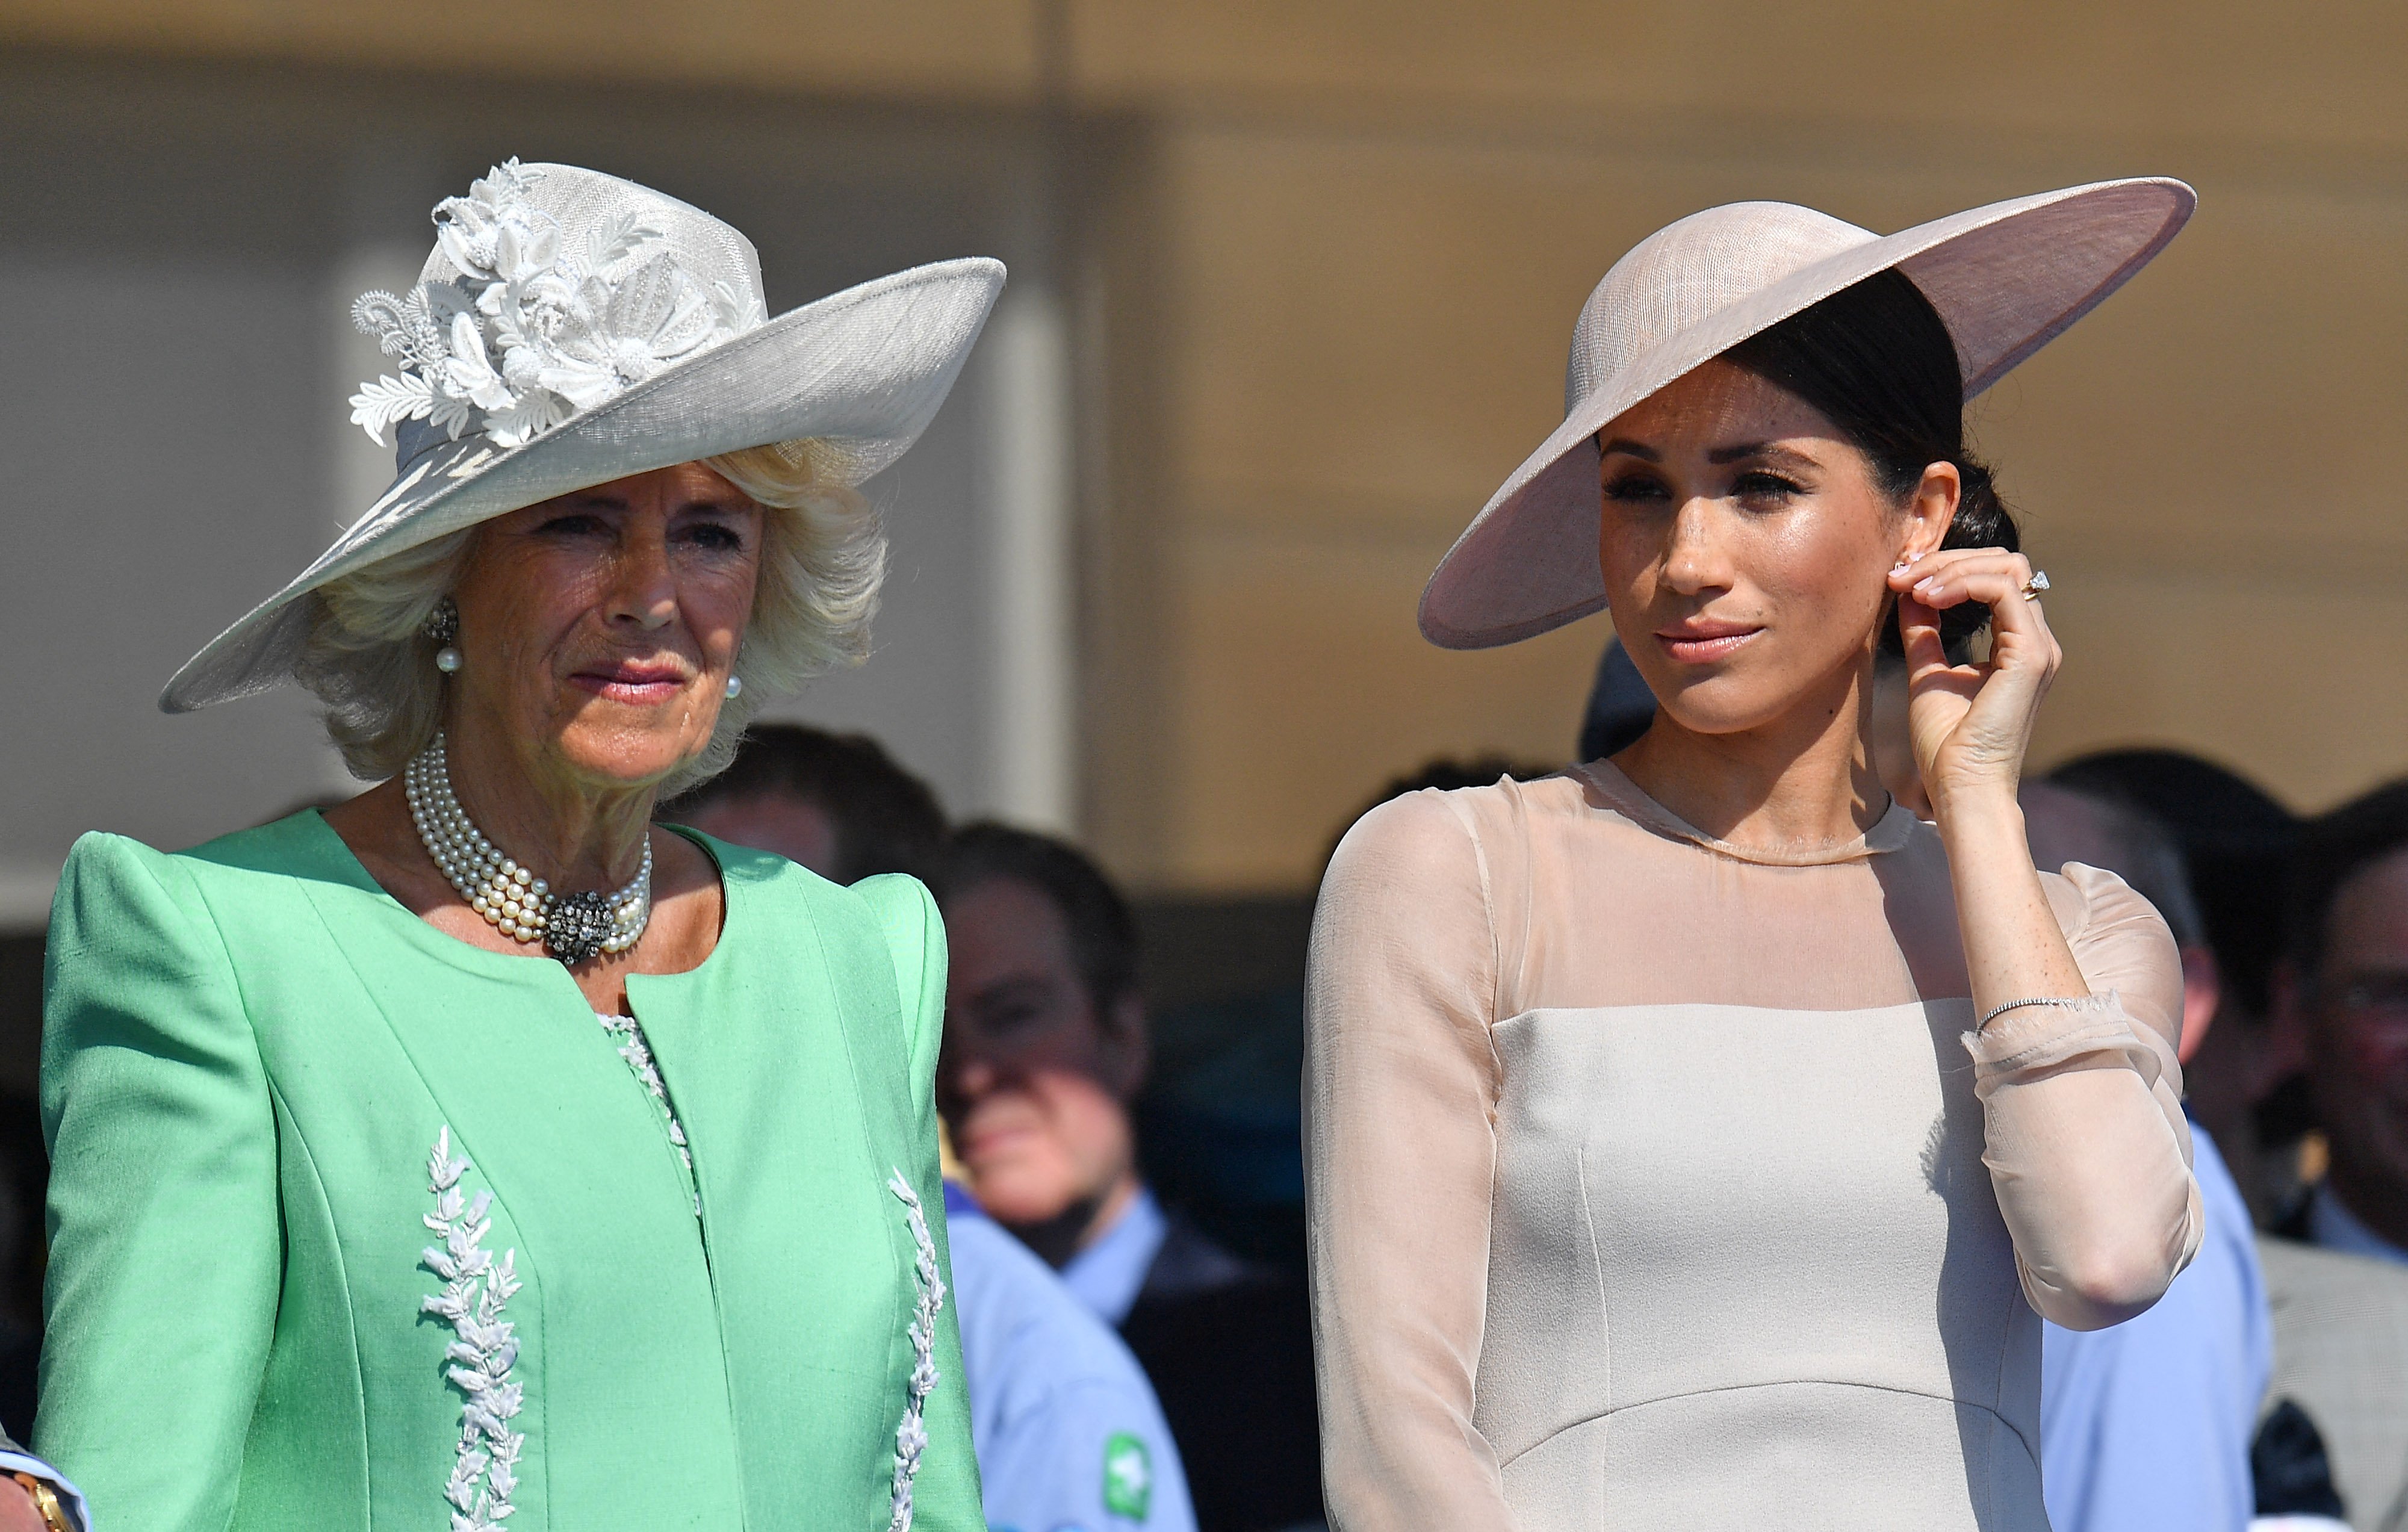 Meghan, Duchess of Sussex, and Britain's Camilla,now Queen Consort attend the Prince of Wales's 70th Birthday Garden Party at Buckingham Palace in London on May 22, 2018. | Source: Getty Images